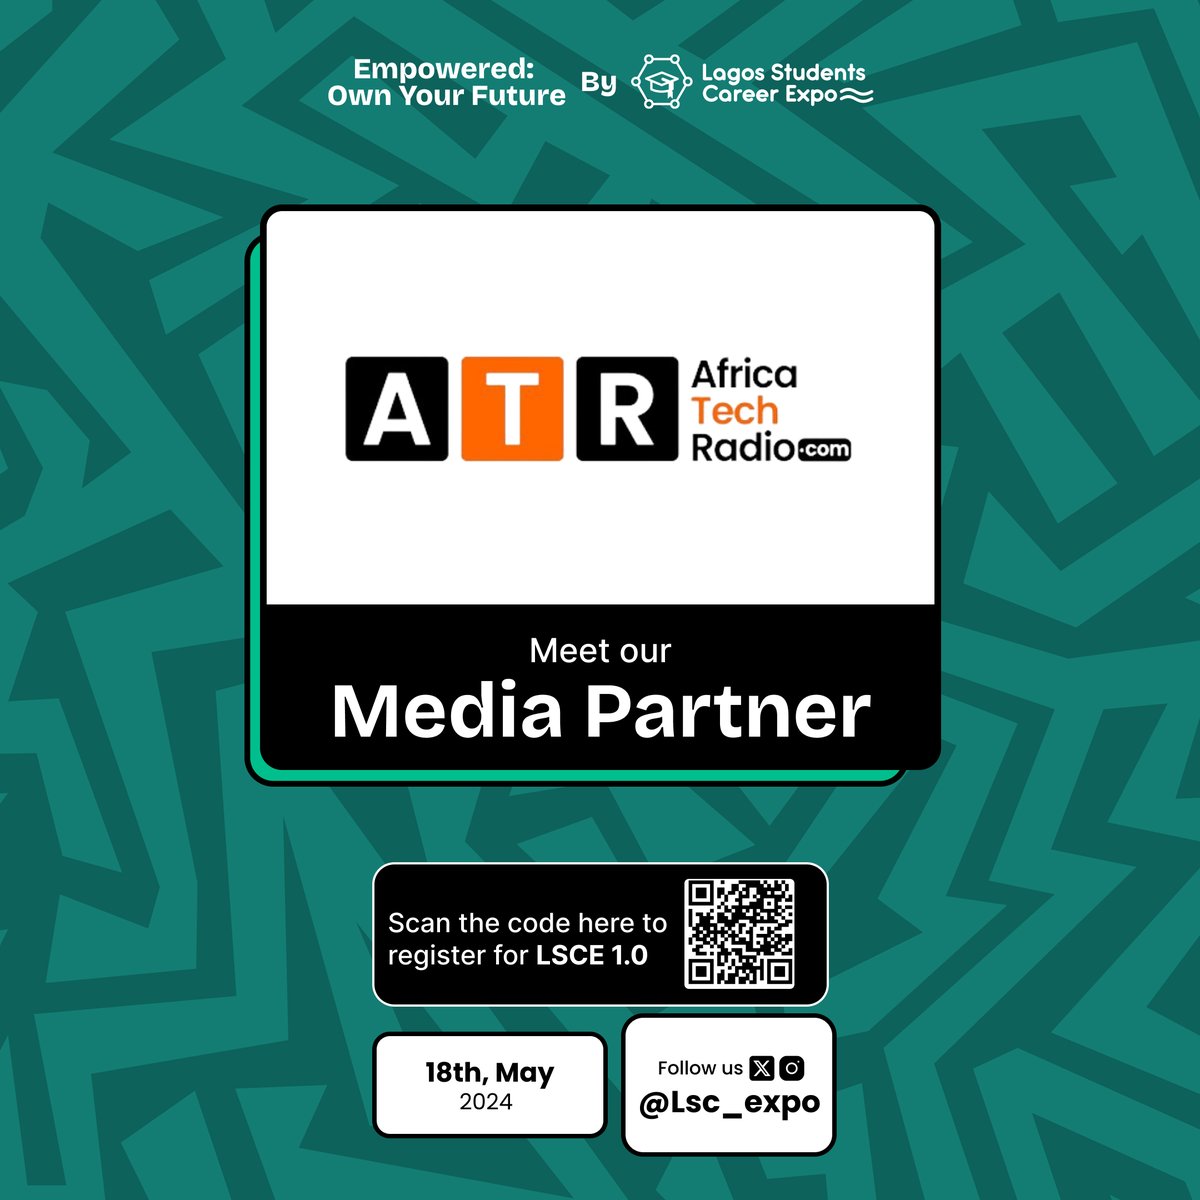 Excited to have
@africatechradio
as our media partner for LSCE! 🎉 Africa Tech Radio (ATR) is Africa’s first online radio station dedicated to the continent’s tech scene. Founded in 2019, ATR aims to enlighten Africa about technology through insightful and educational content.